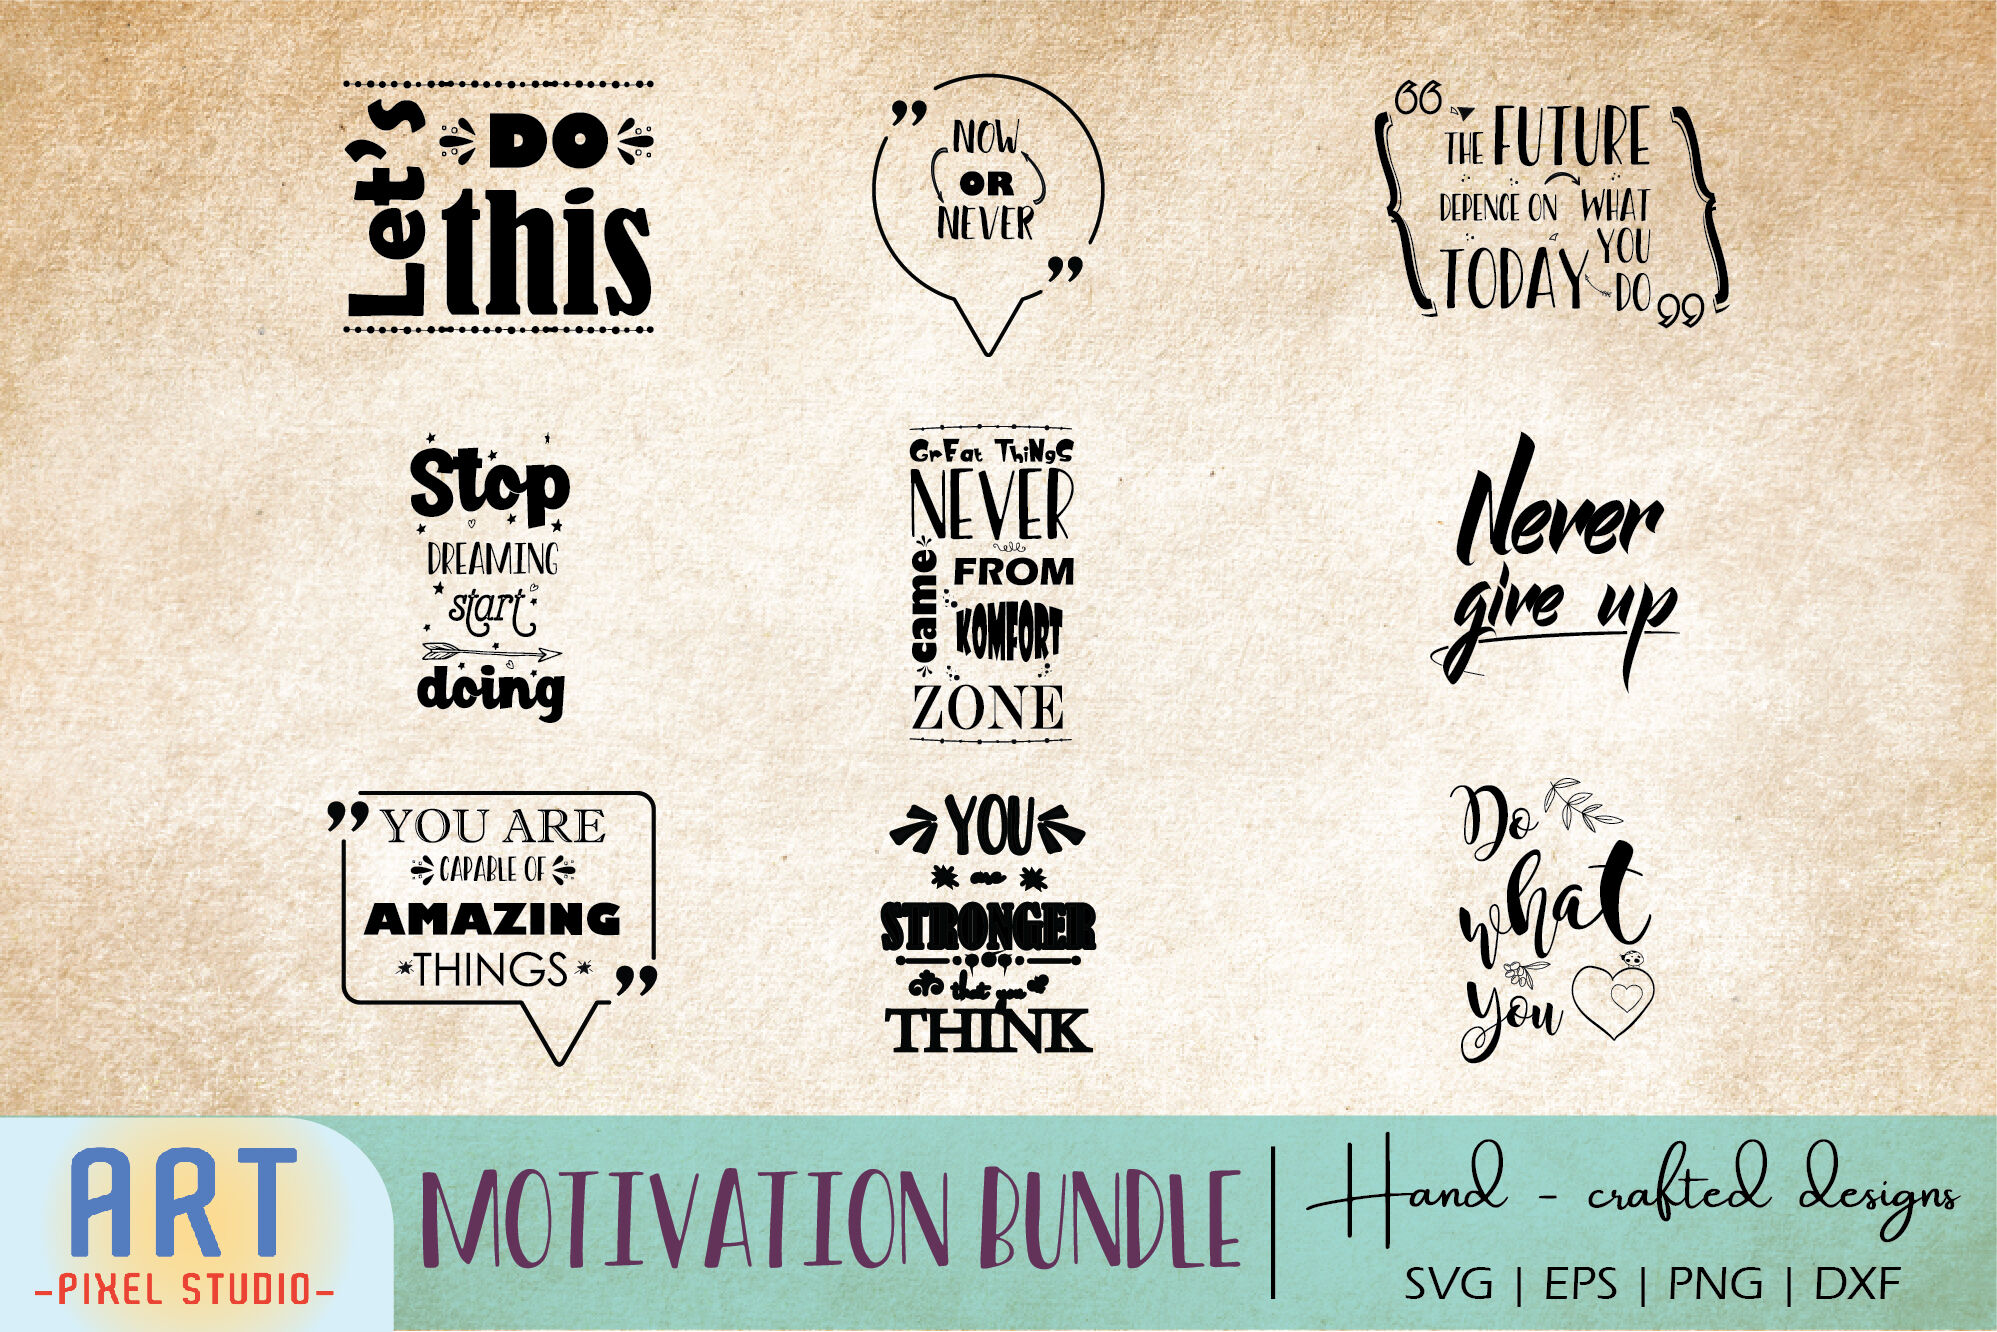 Download Motivational Quotes Inspirational Quotes Svg Quote Wall Art By Art Pixel Studio Thehungryjpeg Com SVG, PNG, EPS, DXF File